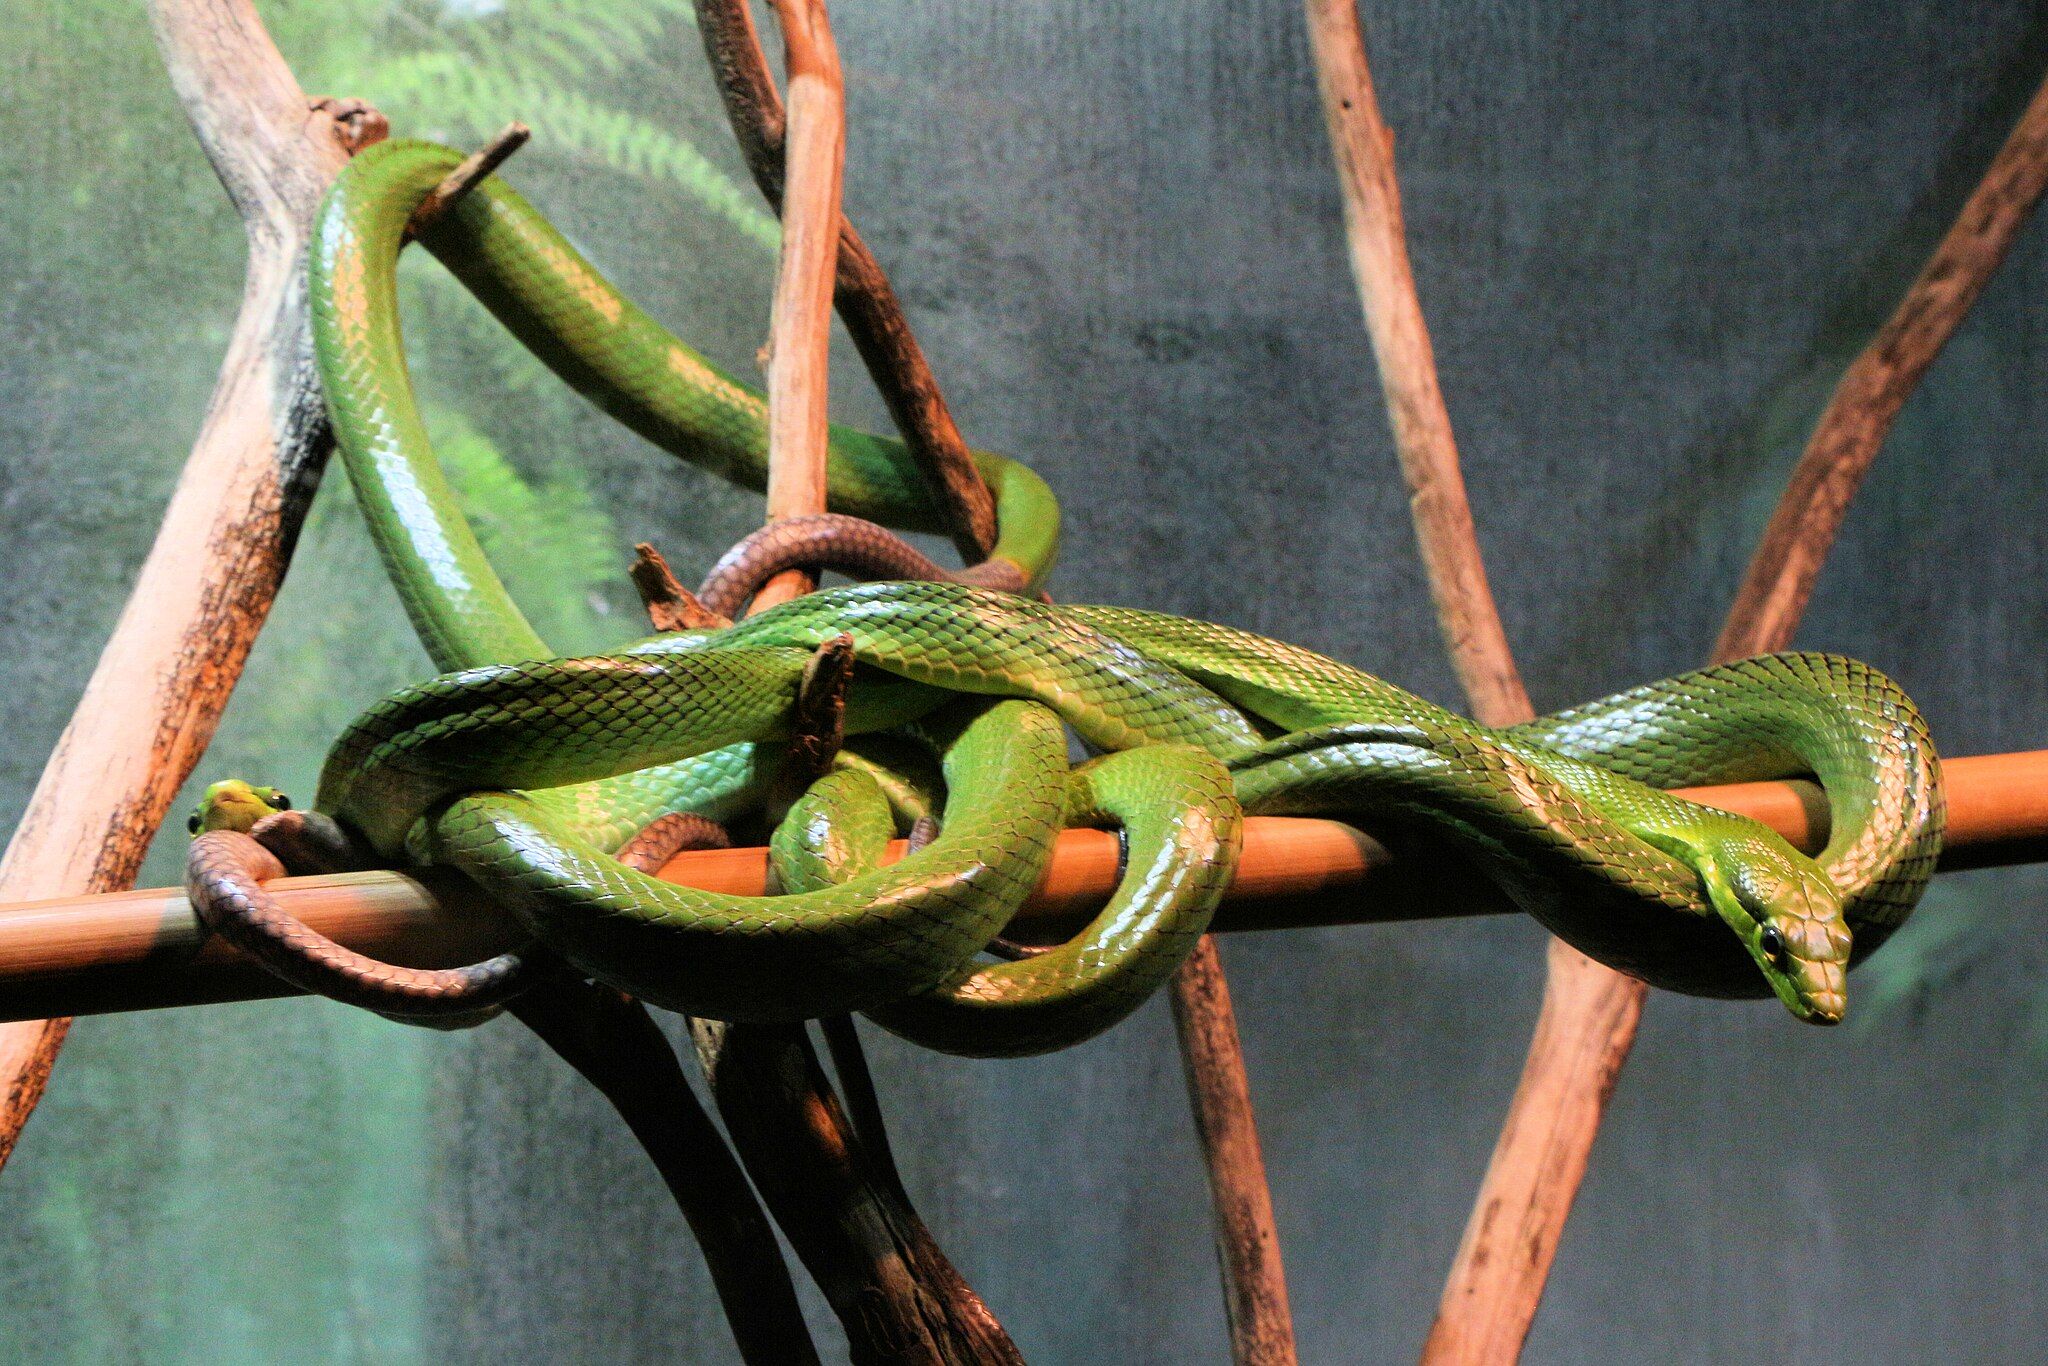 An Australian Tree Snake wrapped around some branches.